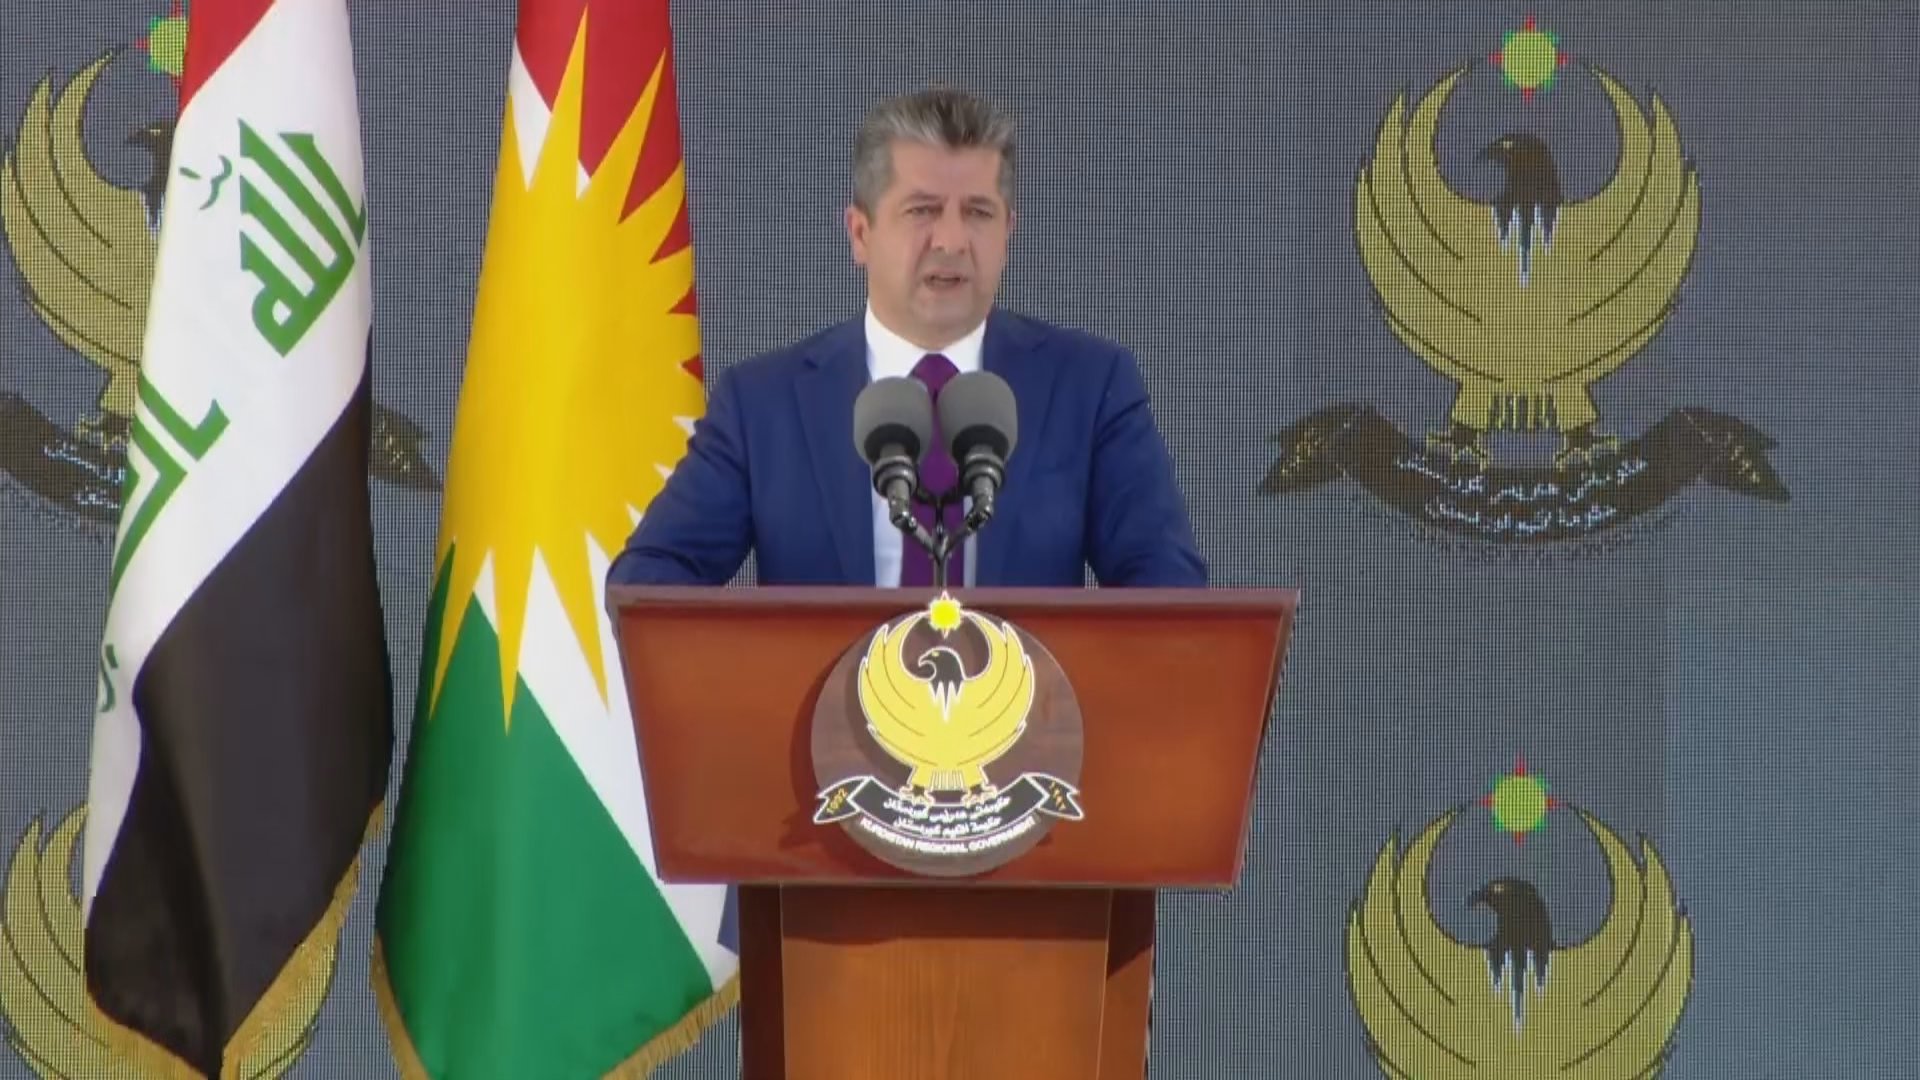 PM Barzani: KRG is working to implement food security projects